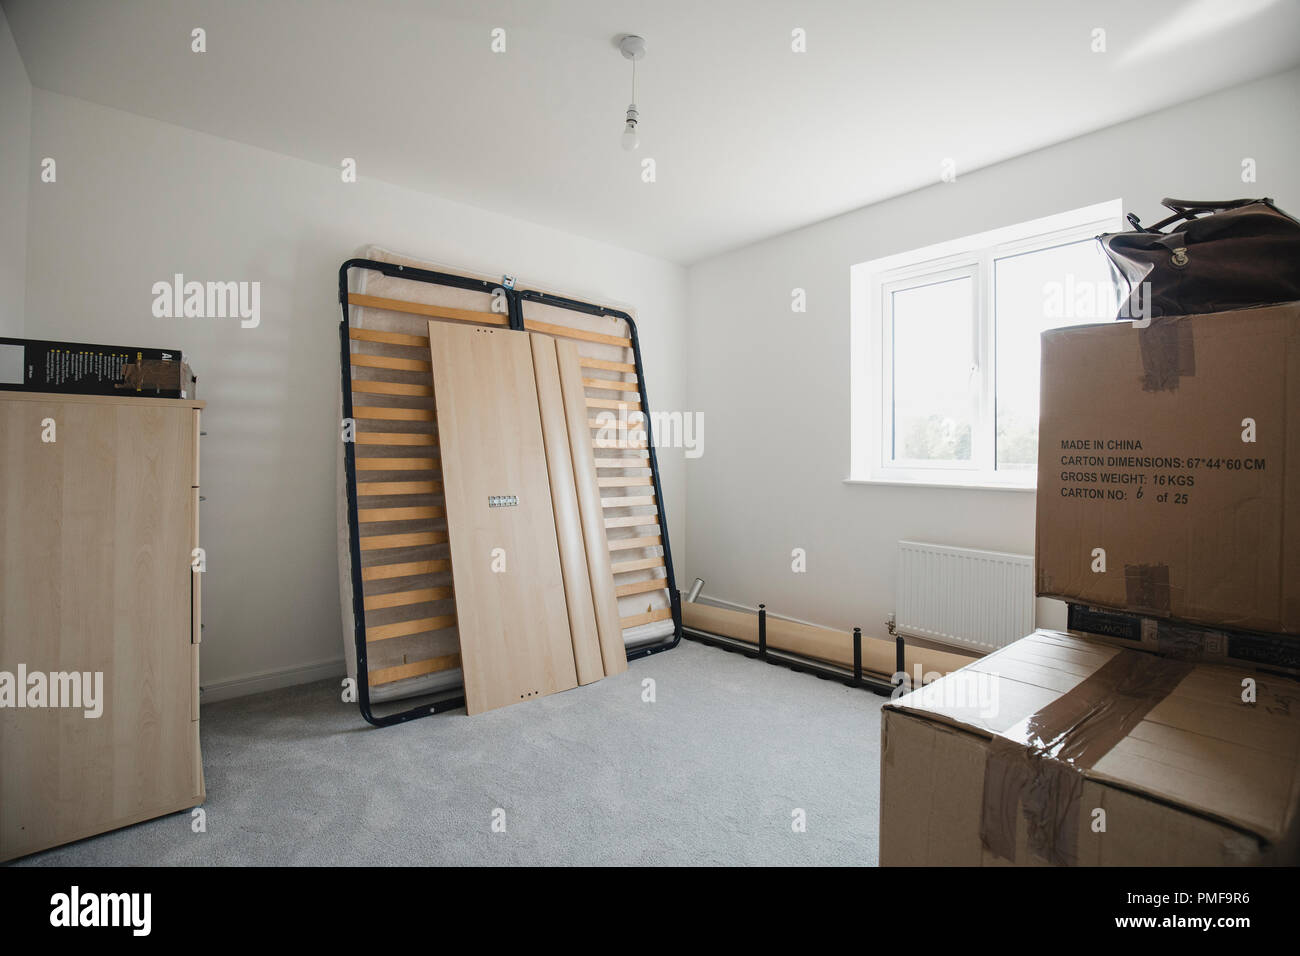 Bedroom of a new home with flatpack furniture and cardboard boxes. Stock Photo